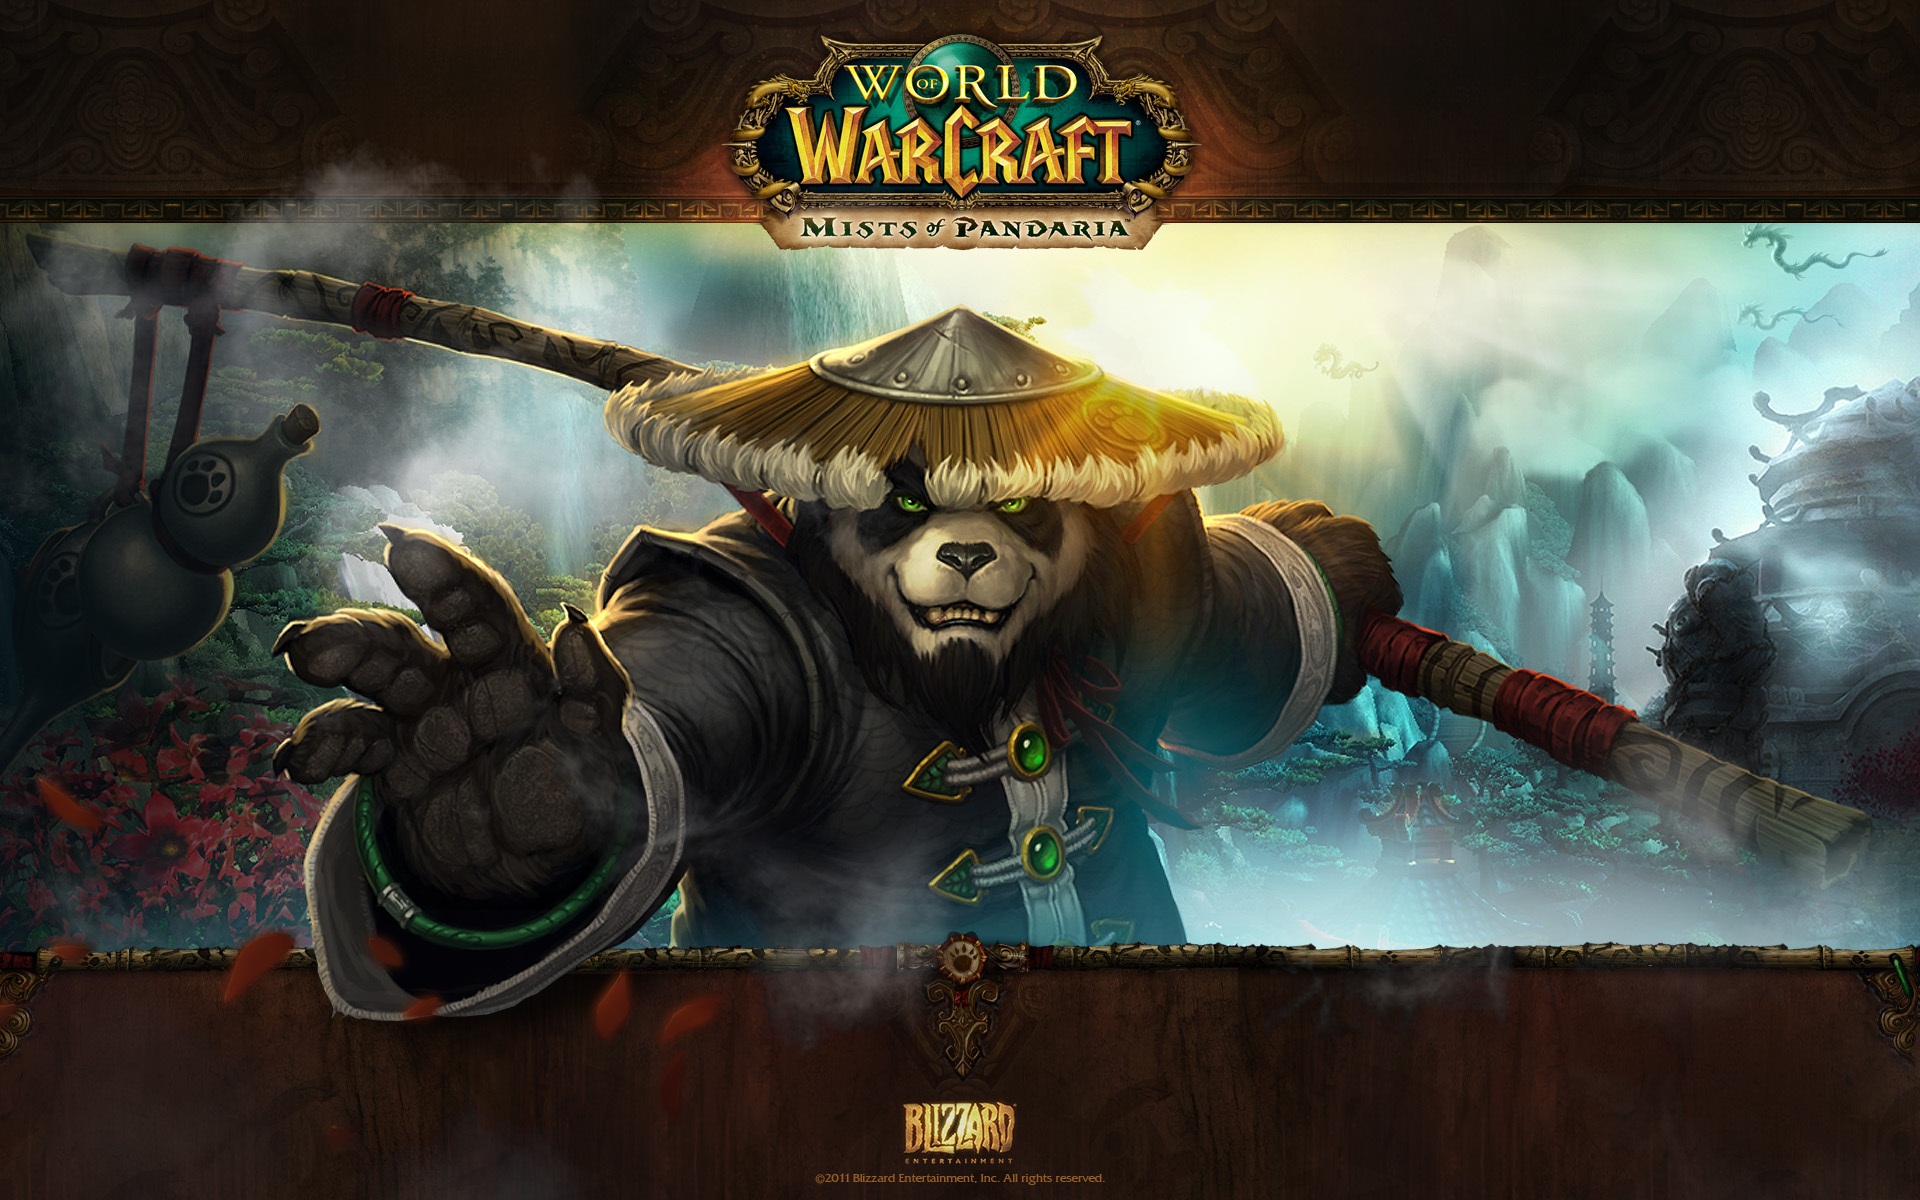 World of Warcraft: Mists of Pandaria HD wallpapers #1 - 1920x1200